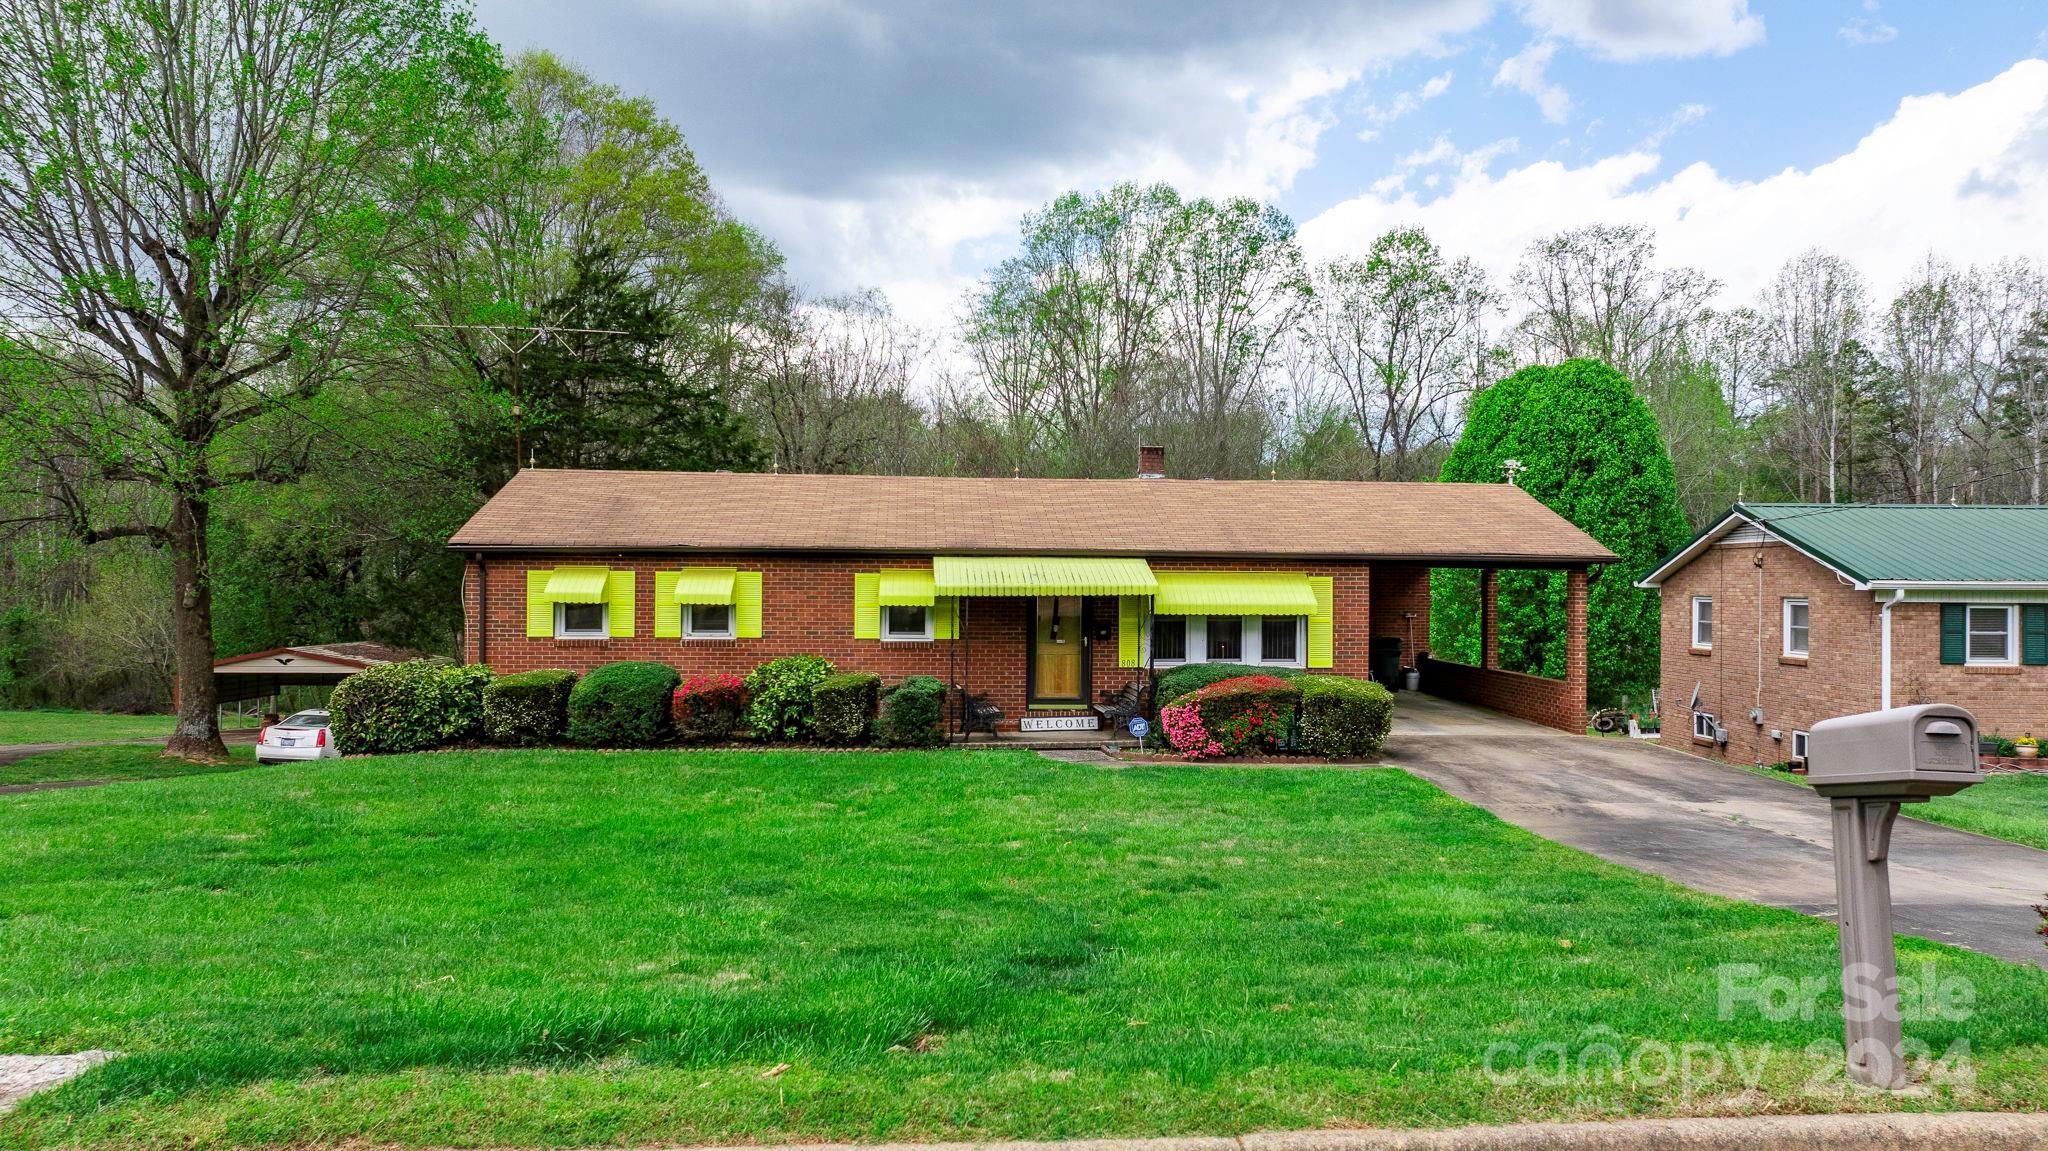 Photo one of 808 S Caldwell Ave Newton NC 28658 | MLS 4124471